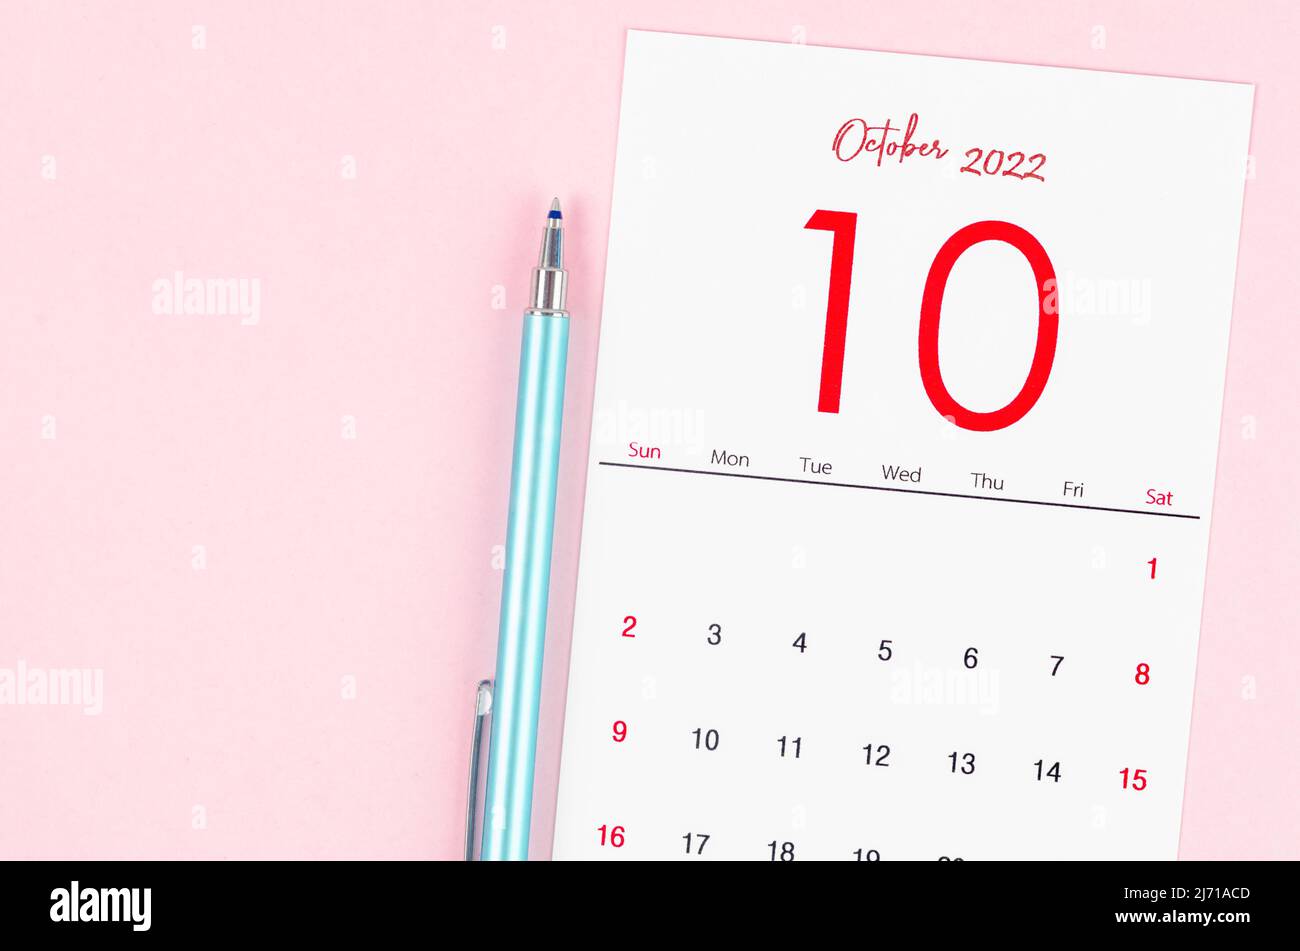 The October 2022 calendar with pen on pink background. Stock Photo